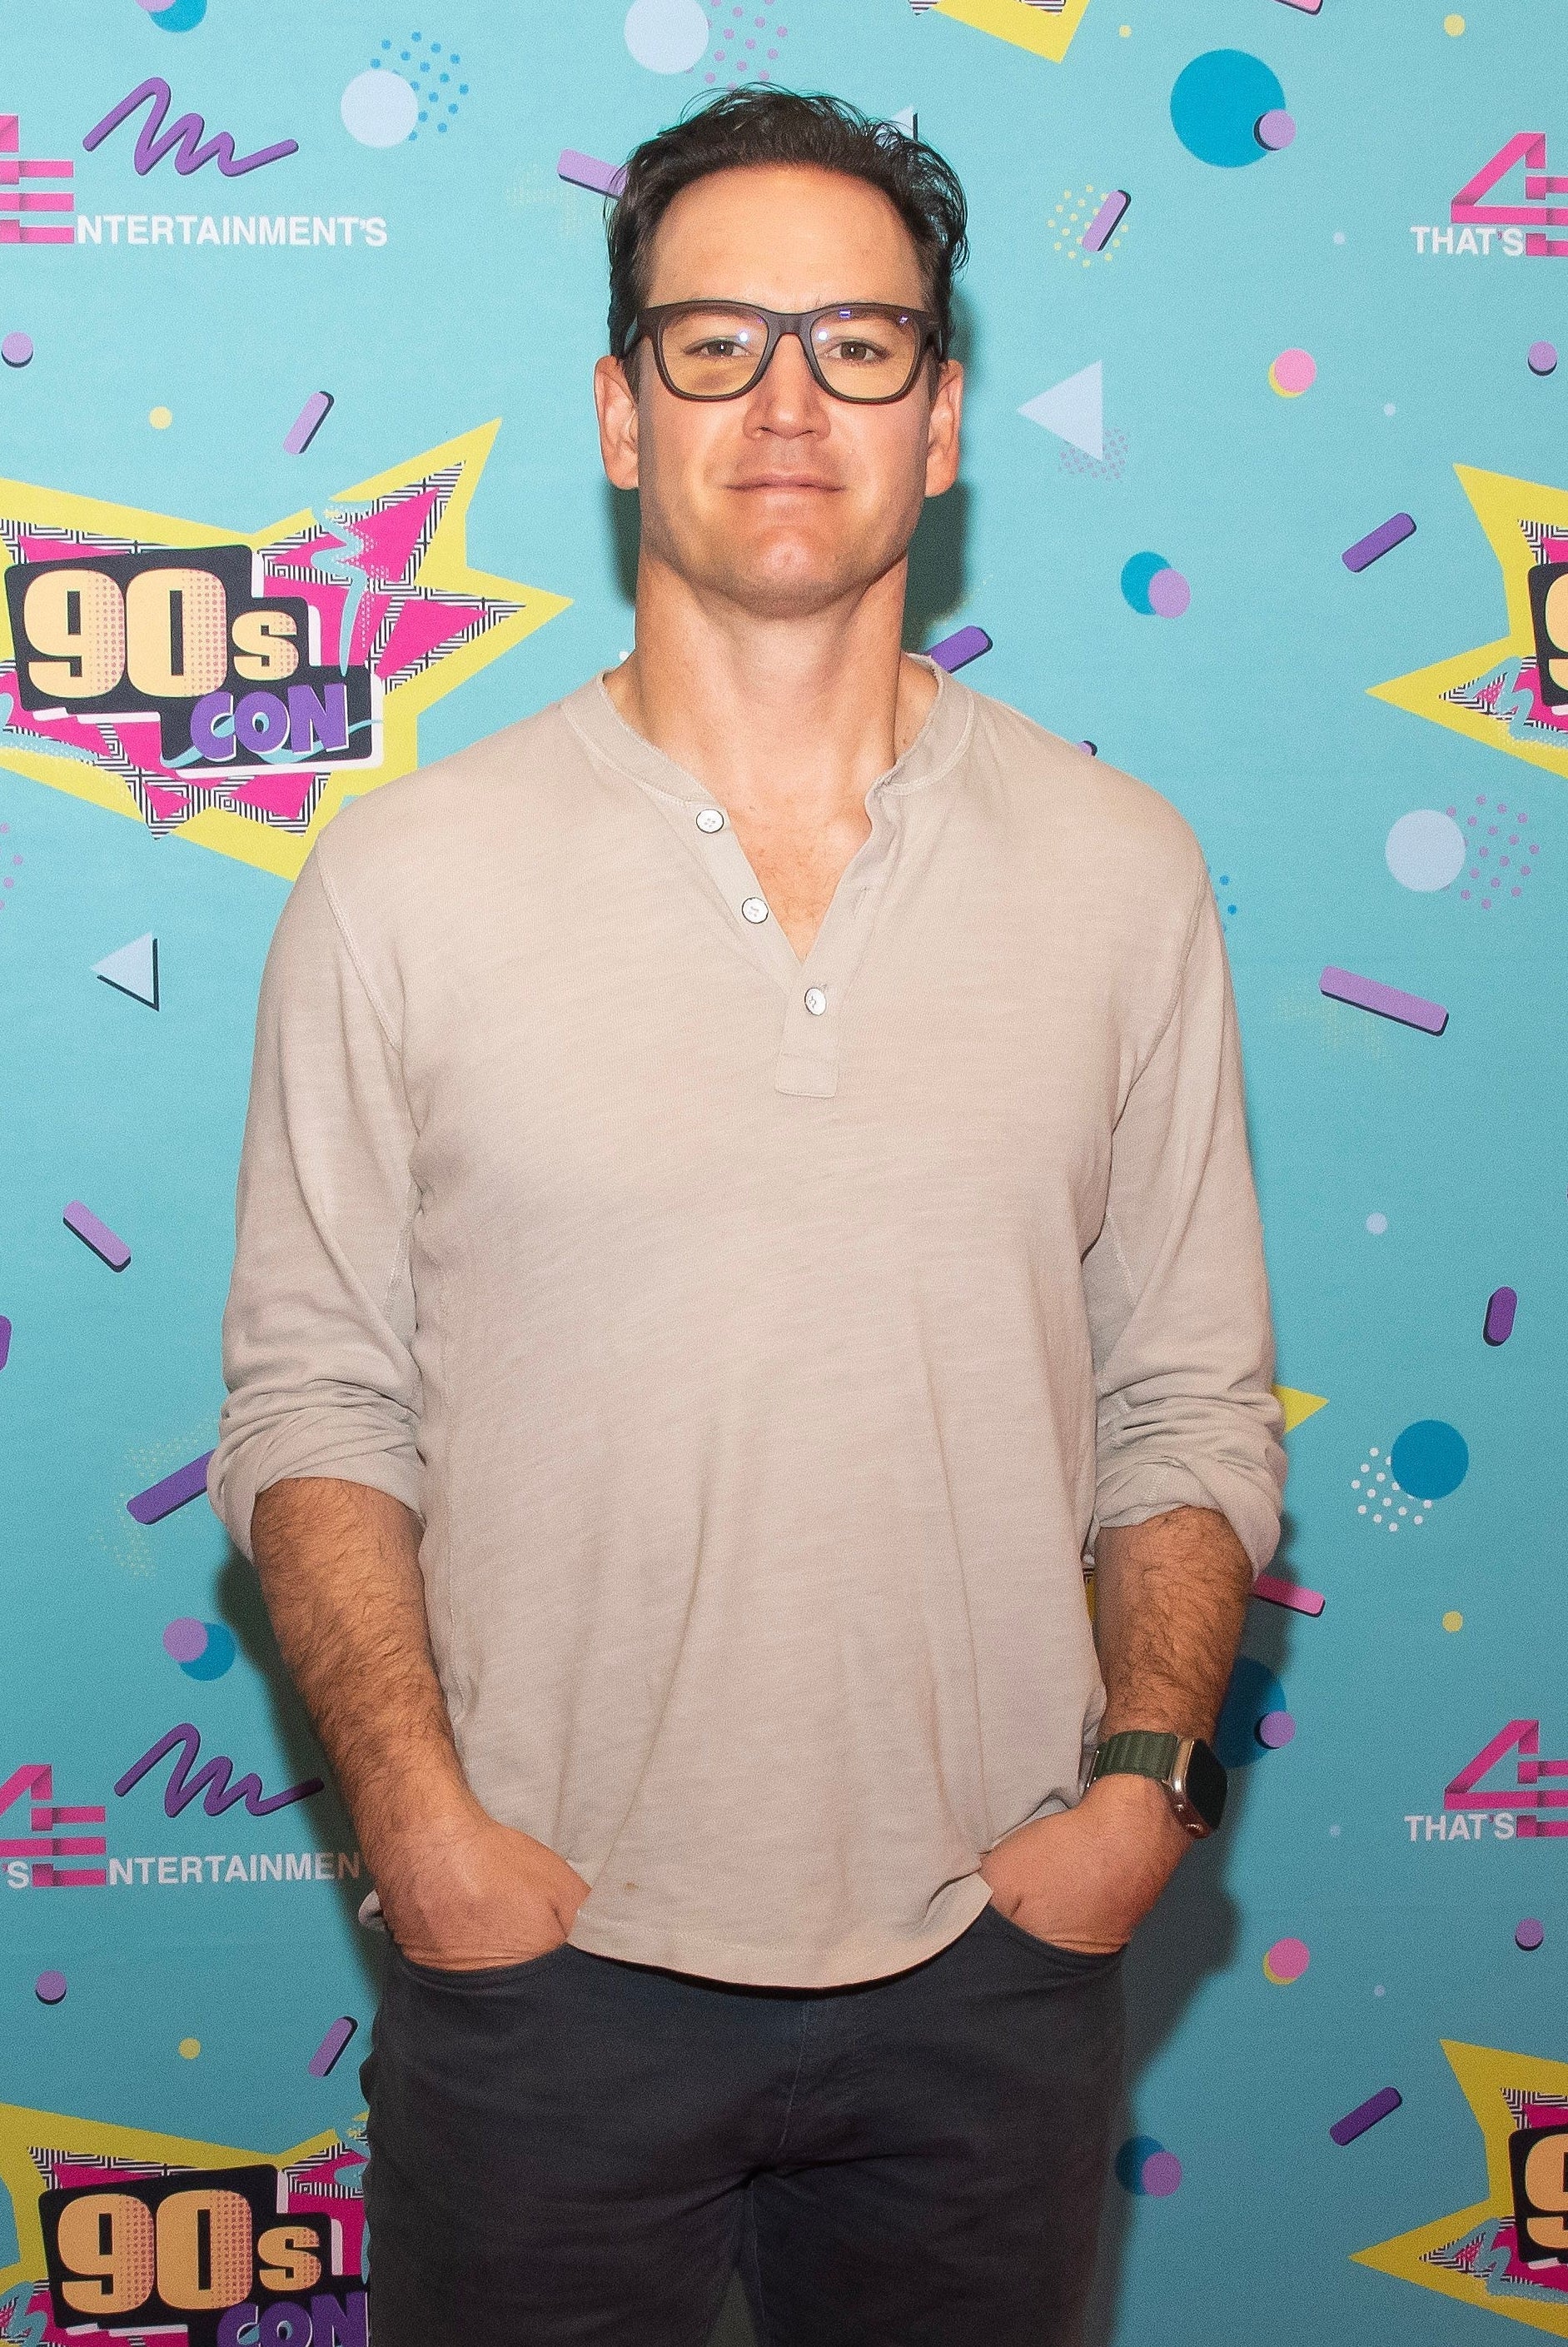 him at an event wearing glasses